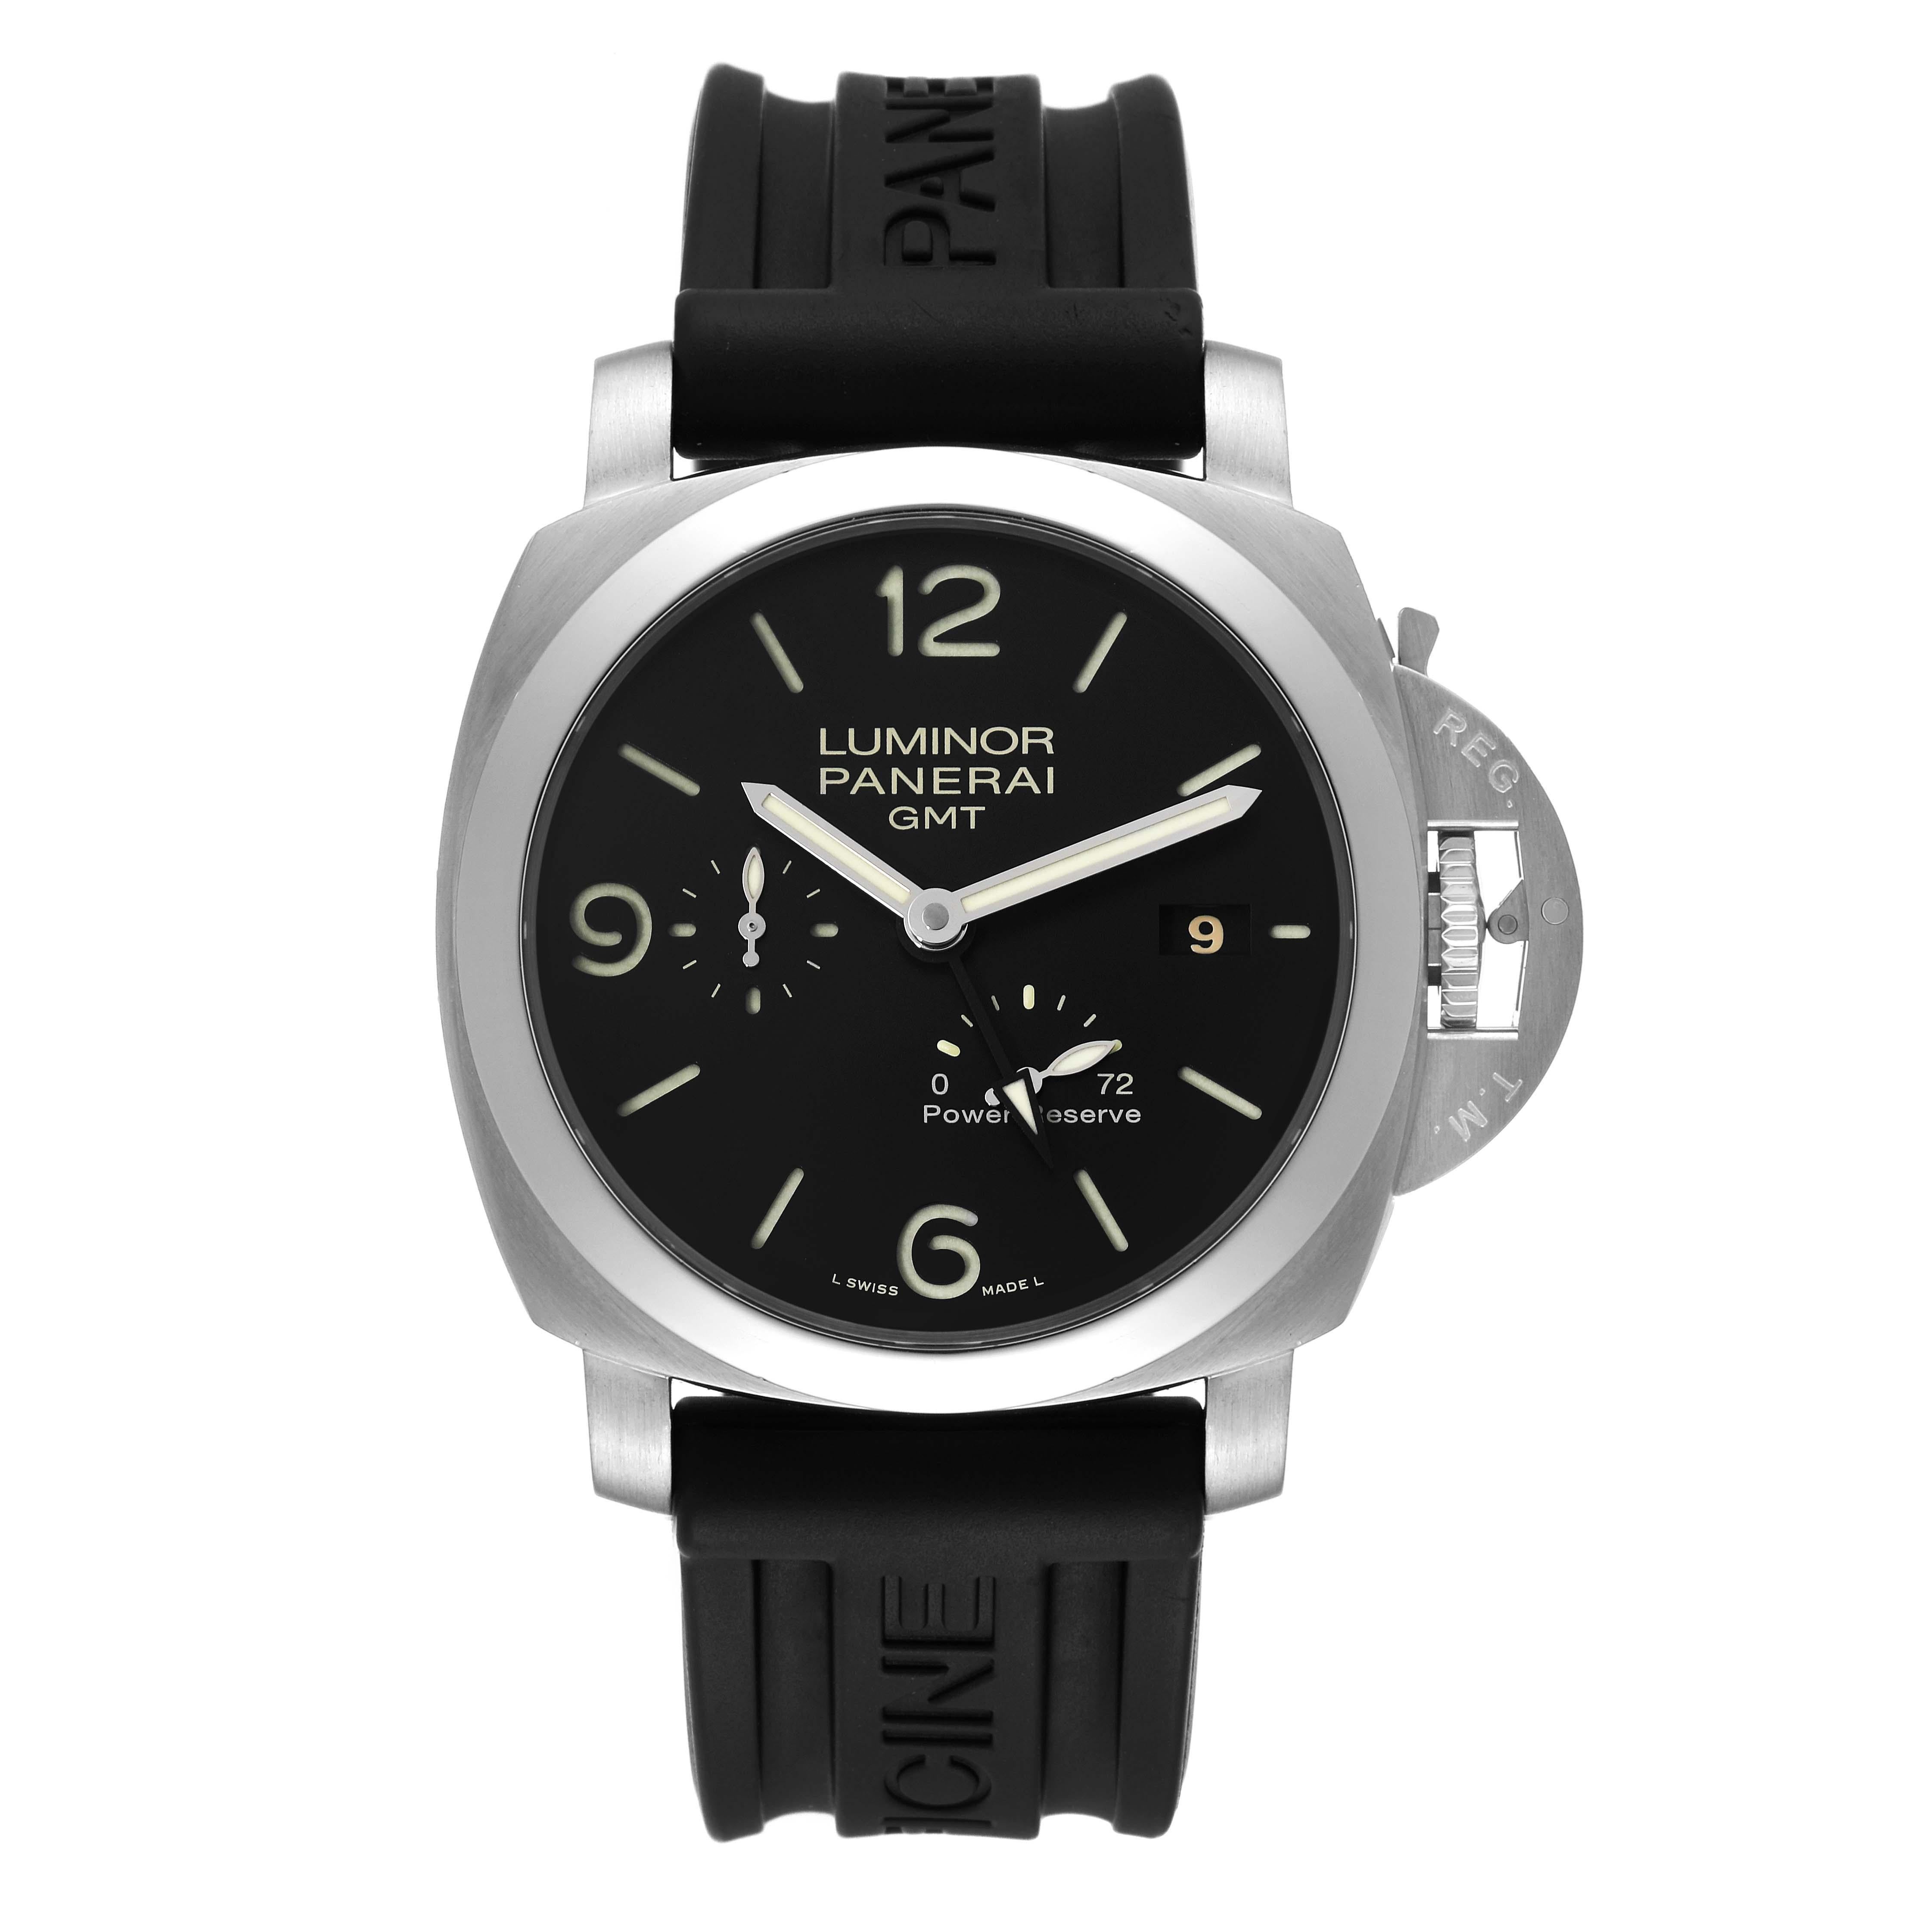 Panerai Luminor GMT 1950 3 Days Power Reserve Steel Mens Watch PAM00321. Automatic self-winding movement. Two part cushion shaped stainless steel case 44.0 mm in diameter. Panerai patented crown protector. Transparent exhibition sapphire crystal